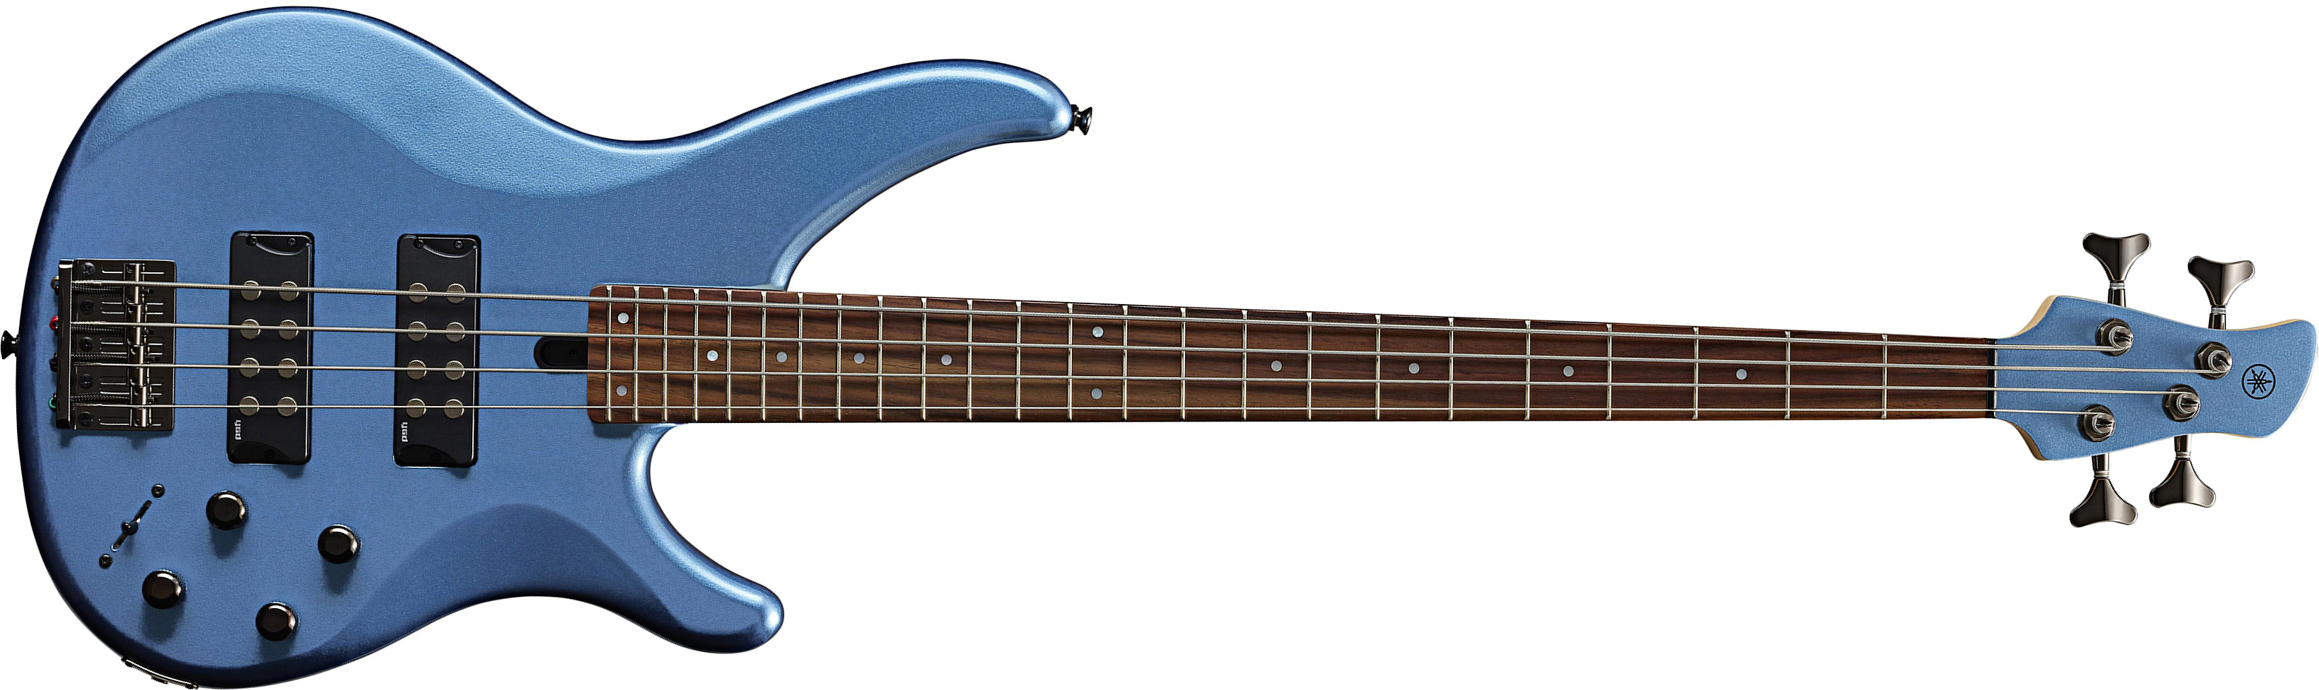 Yamaha Trbx305 5c Active Rw - Factory Blue - Solidbody E-bass - Main picture